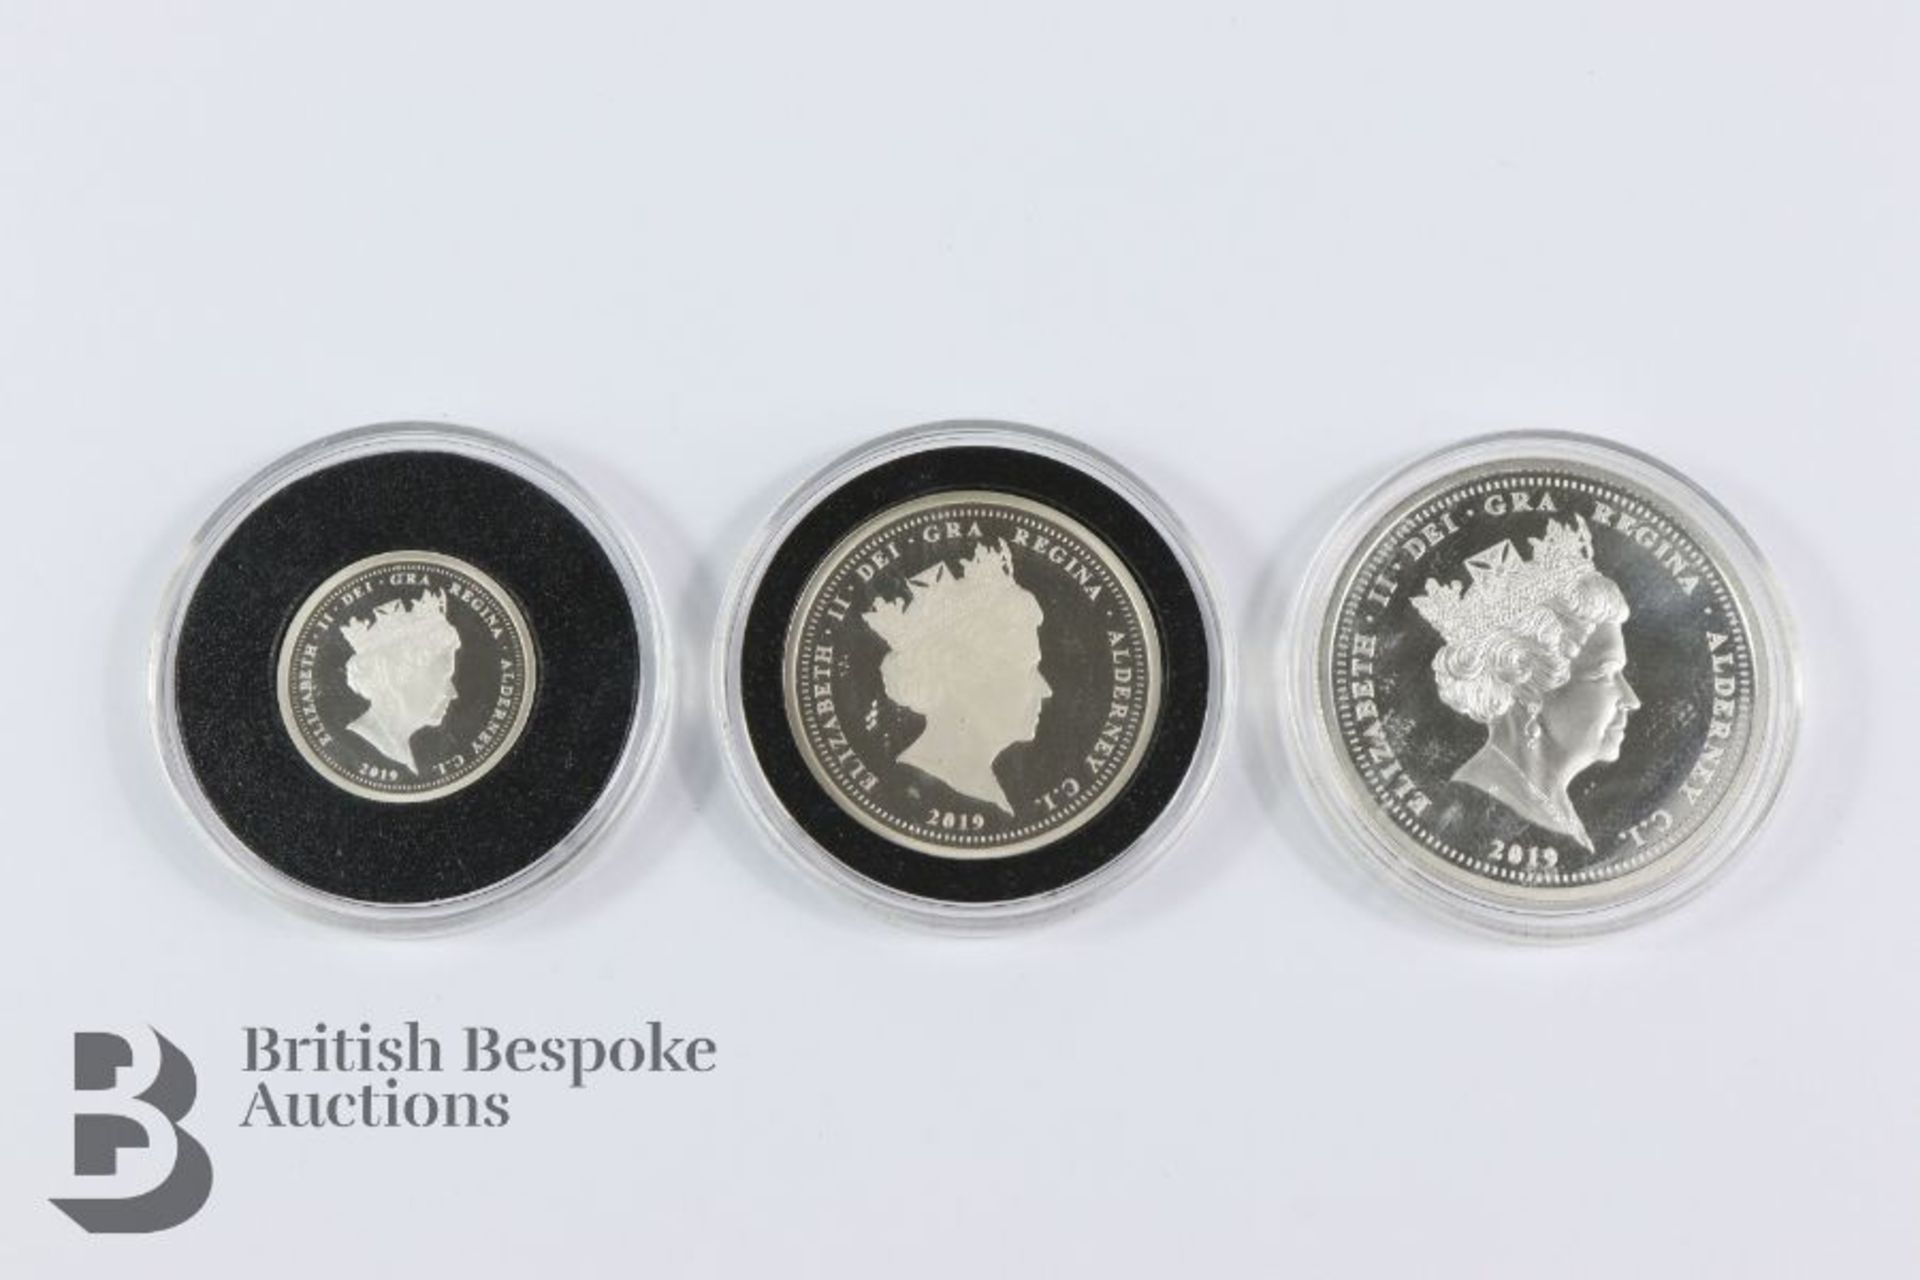 Boxed Set of Silver Proof Coins - Image 2 of 3